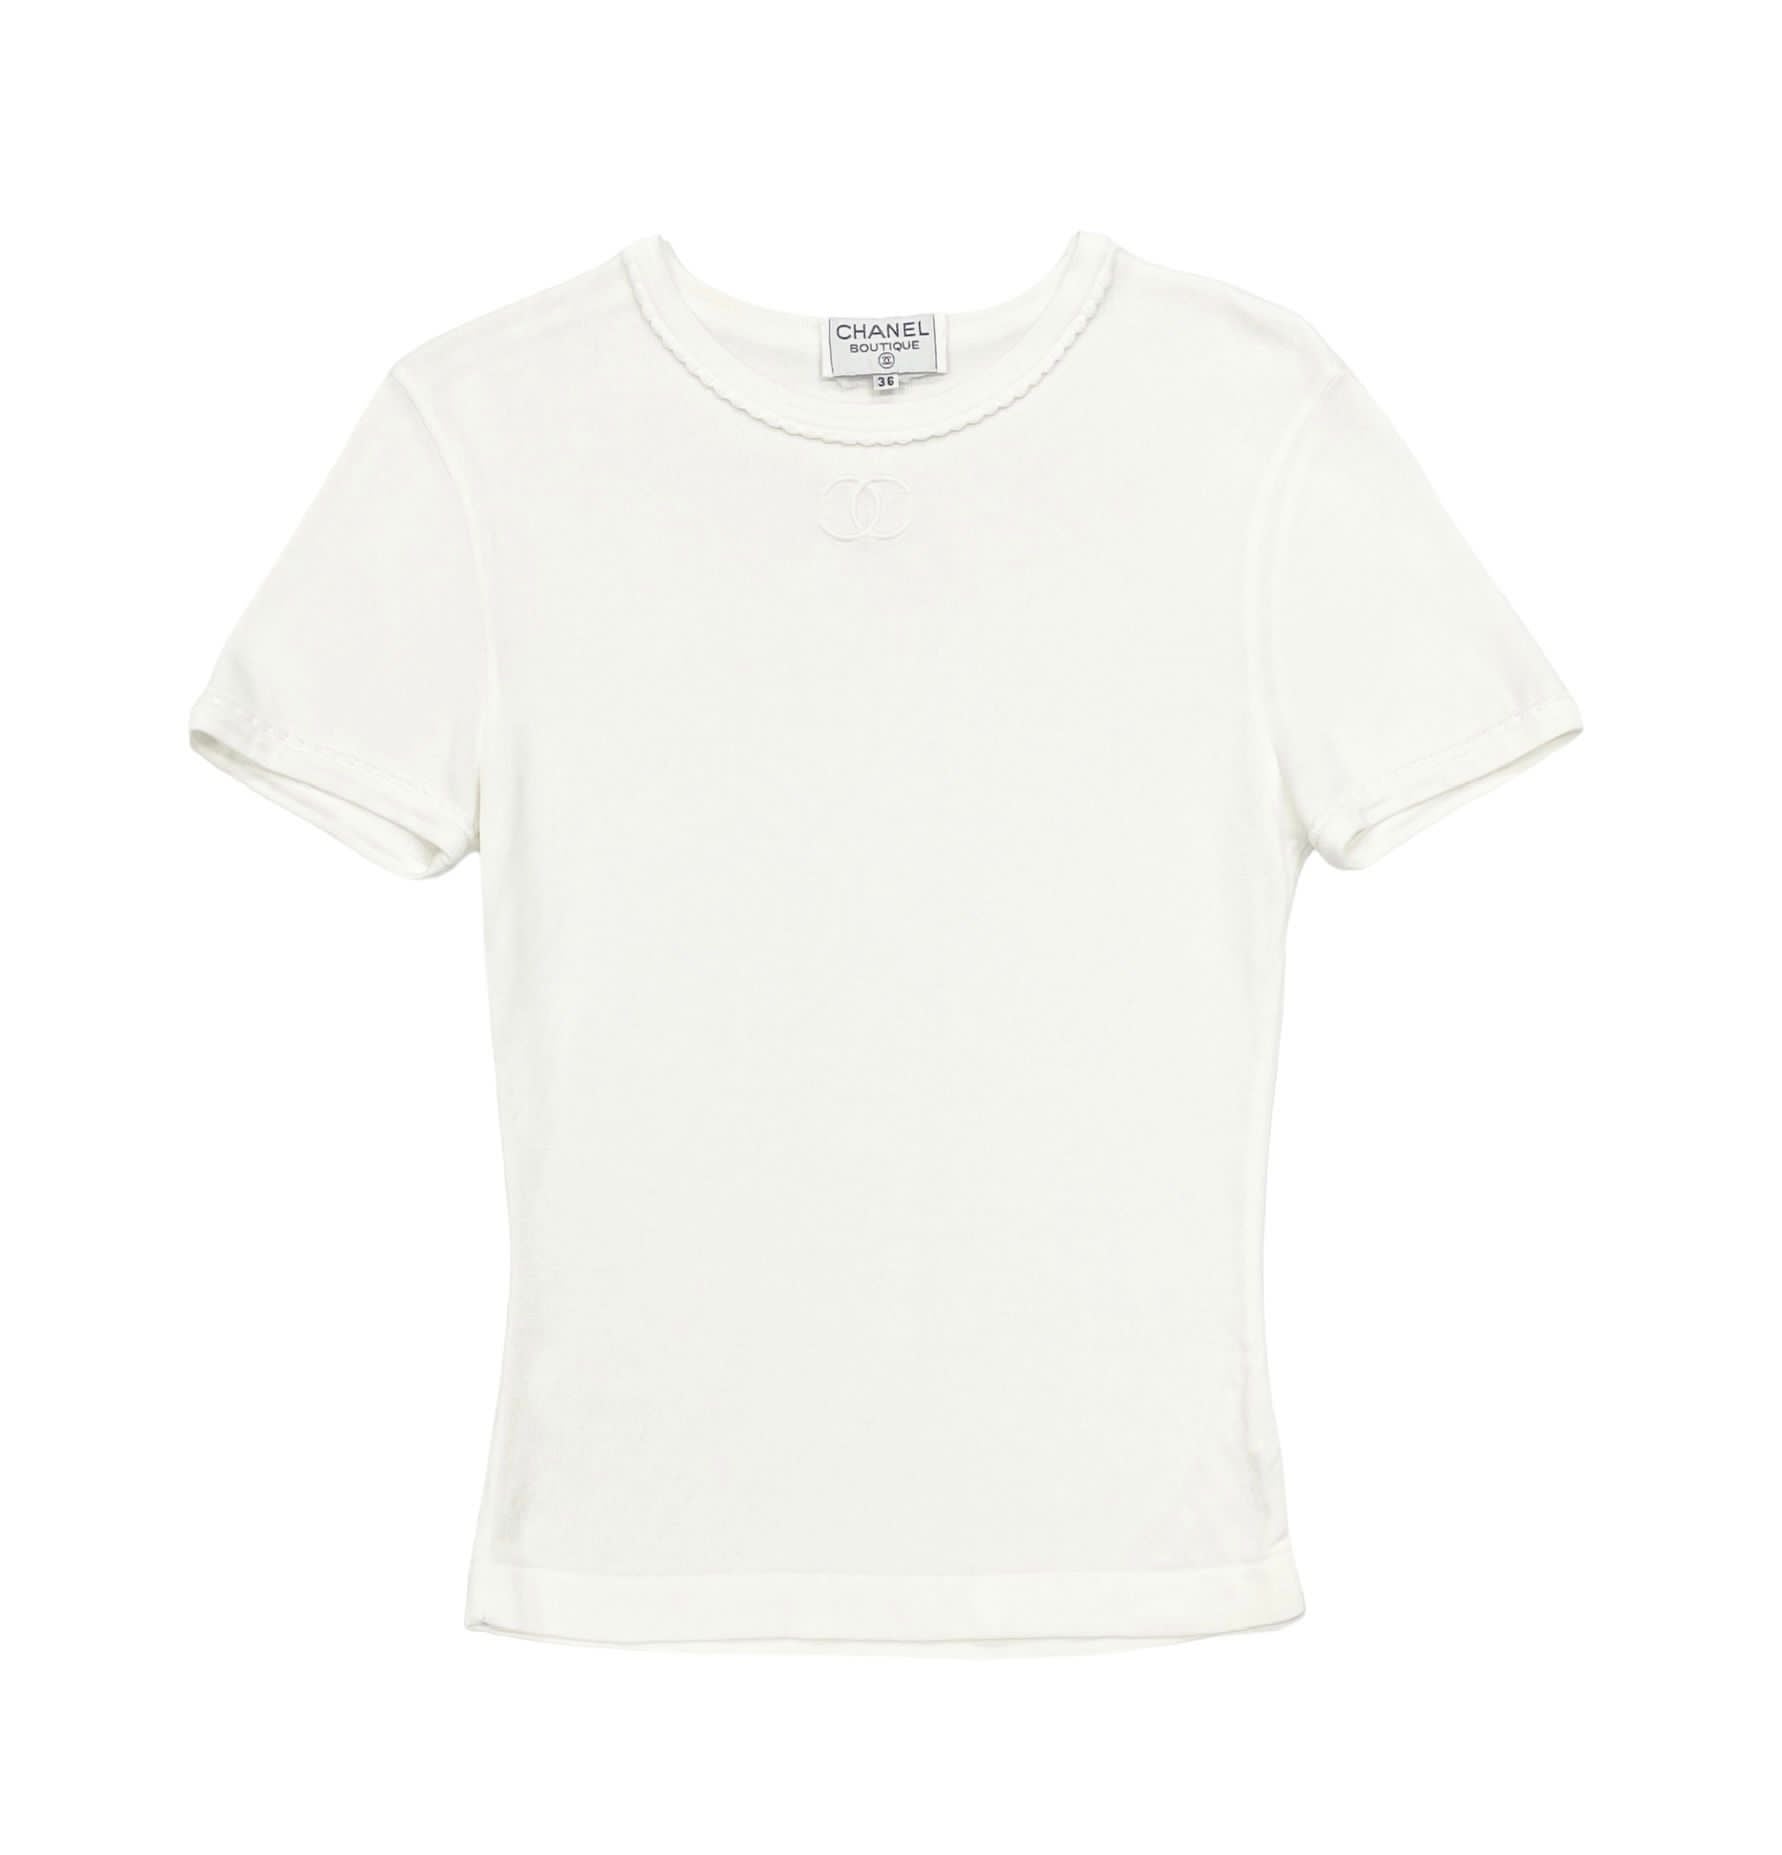 Chanel T-shirt - Shop for Chanel T-shirt on Wheretoget